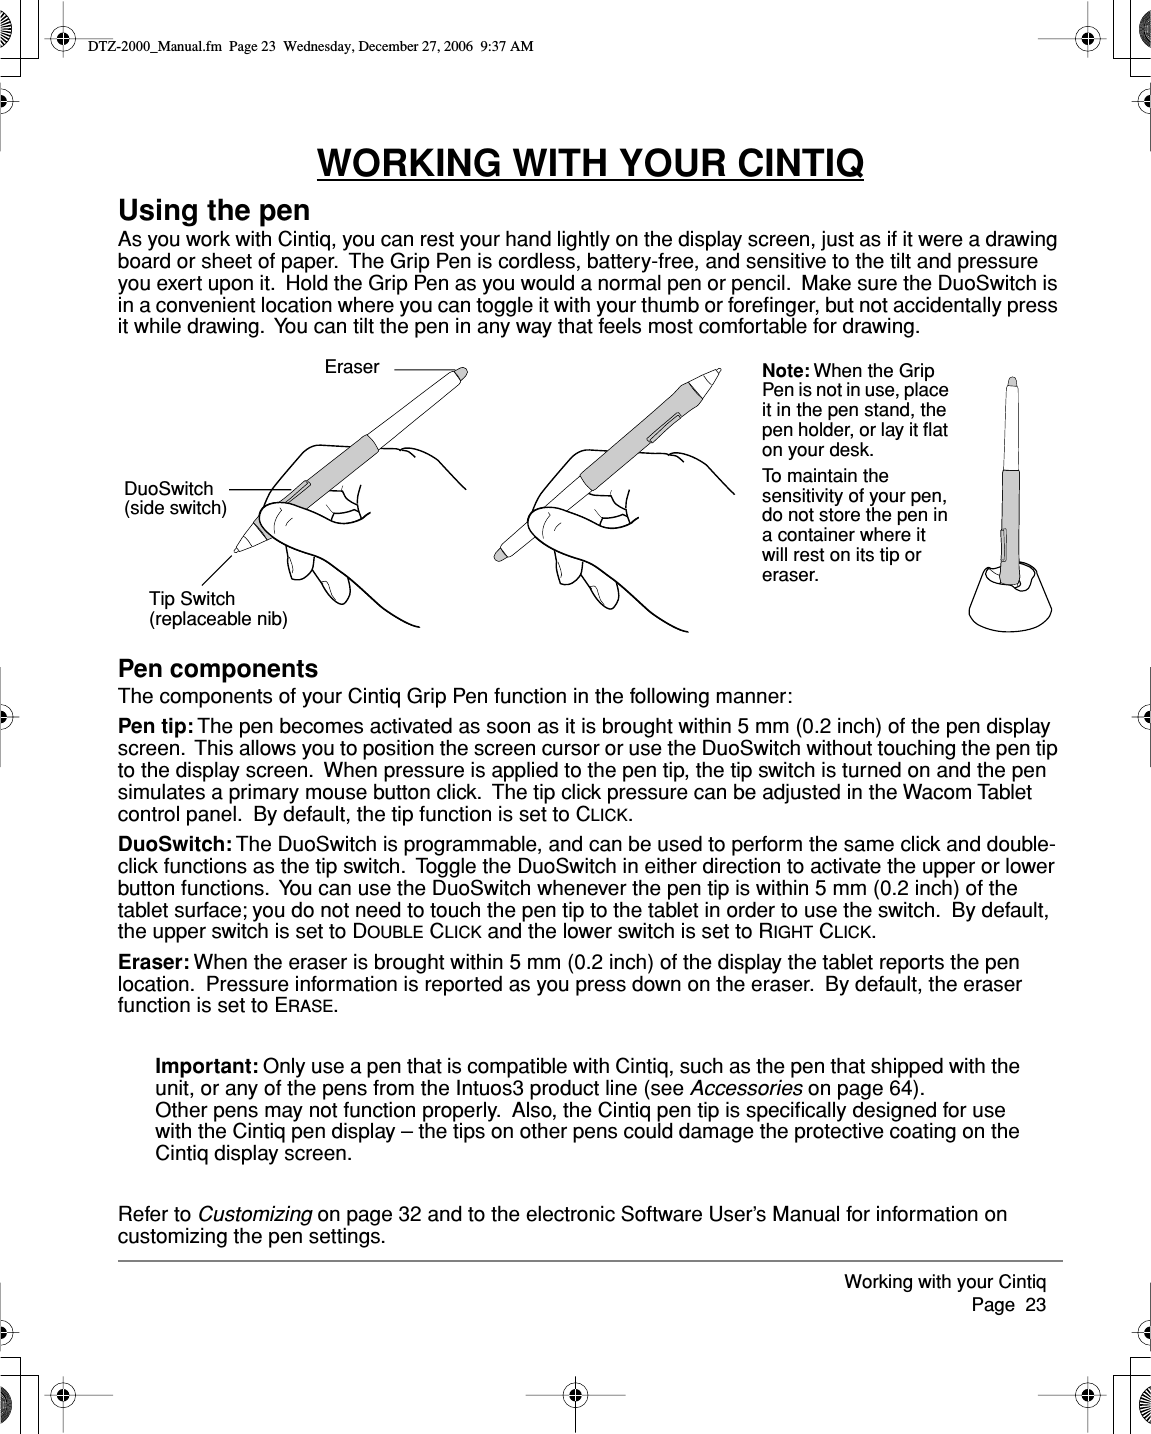 Working with your Cintiq     Page  23WORKING WITH YOUR CINTIQUsing the penAs you work with Cintiq, you can rest your hand lightly on the display screen, just as if it were a drawing board or sheet of paper.  The Grip Pen is cordless, battery-free, and sensitive to the tilt and pressure you exert upon it.  Hold the Grip Pen as you would a normal pen or pencil.  Make sure the DuoSwitch is in a convenient location where you can toggle it with your thumb or foreﬁnger, but not accidentally press it while drawing.  You can tilt the pen in any way that feels most comfortable for drawing.Pen componentsThe components of your Cintiq Grip Pen function in the following manner:Pen tip: The pen becomes activated as soon as it is brought within 5 mm (0.2 inch) of the pen display screen.  This allows you to position the screen cursor or use the DuoSwitch without touching the pen tip to the display screen.  When pressure is applied to the pen tip, the tip switch is turned on and the pen simulates a primary mouse button click.  The tip click pressure can be adjusted in the Wacom Tablet control panel.  By default, the tip function is set to CLICK.DuoSwitch: The DuoSwitch is programmable, and can be used to perform the same click and double-click functions as the tip switch.  Toggle the DuoSwitch in either direction to activate the upper or lower button functions.  You can use the DuoSwitch whenever the pen tip is within 5 mm (0.2 inch) of the tablet surface; you do not need to touch the pen tip to the tablet in order to use the switch.  By default, the upper switch is set to DOUBLE CLICK and the lower switch is set to RIGHT CLICK.Eraser: When the eraser is brought within 5 mm (0.2 inch) of the display the tablet reports the pen location.  Pressure information is reported as you press down on the eraser.  By default, the eraser function is set to ERASE.Important: Only use a pen that is compatible with Cintiq, such as the pen that shipped with the unit, or any of the pens from the Intuos3 product line (see Accessories on page 64).  Other pens may not function properly.  Also, the Cintiq pen tip is speciﬁcally designed for use with the Cintiq pen display – the tips on other pens could damage the protective coating on the Cintiq display screen.Refer to Customizing on page 32 and to the electronic Software User’s Manual for information on customizing the pen settings.EraserDuoSwitch(side switch)Tip Switch(replaceable nib)Note: When the Grip Pen is not in use, place it in the pen stand, the pen holder, or lay it ﬂat on your desk.To maintain the sensitivity of your pen, do not store the pen in a container where it will rest on its tip or eraser.DTZ-2000_Manual.fm  Page 23  Wednesday, December 27, 2006  9:37 AM